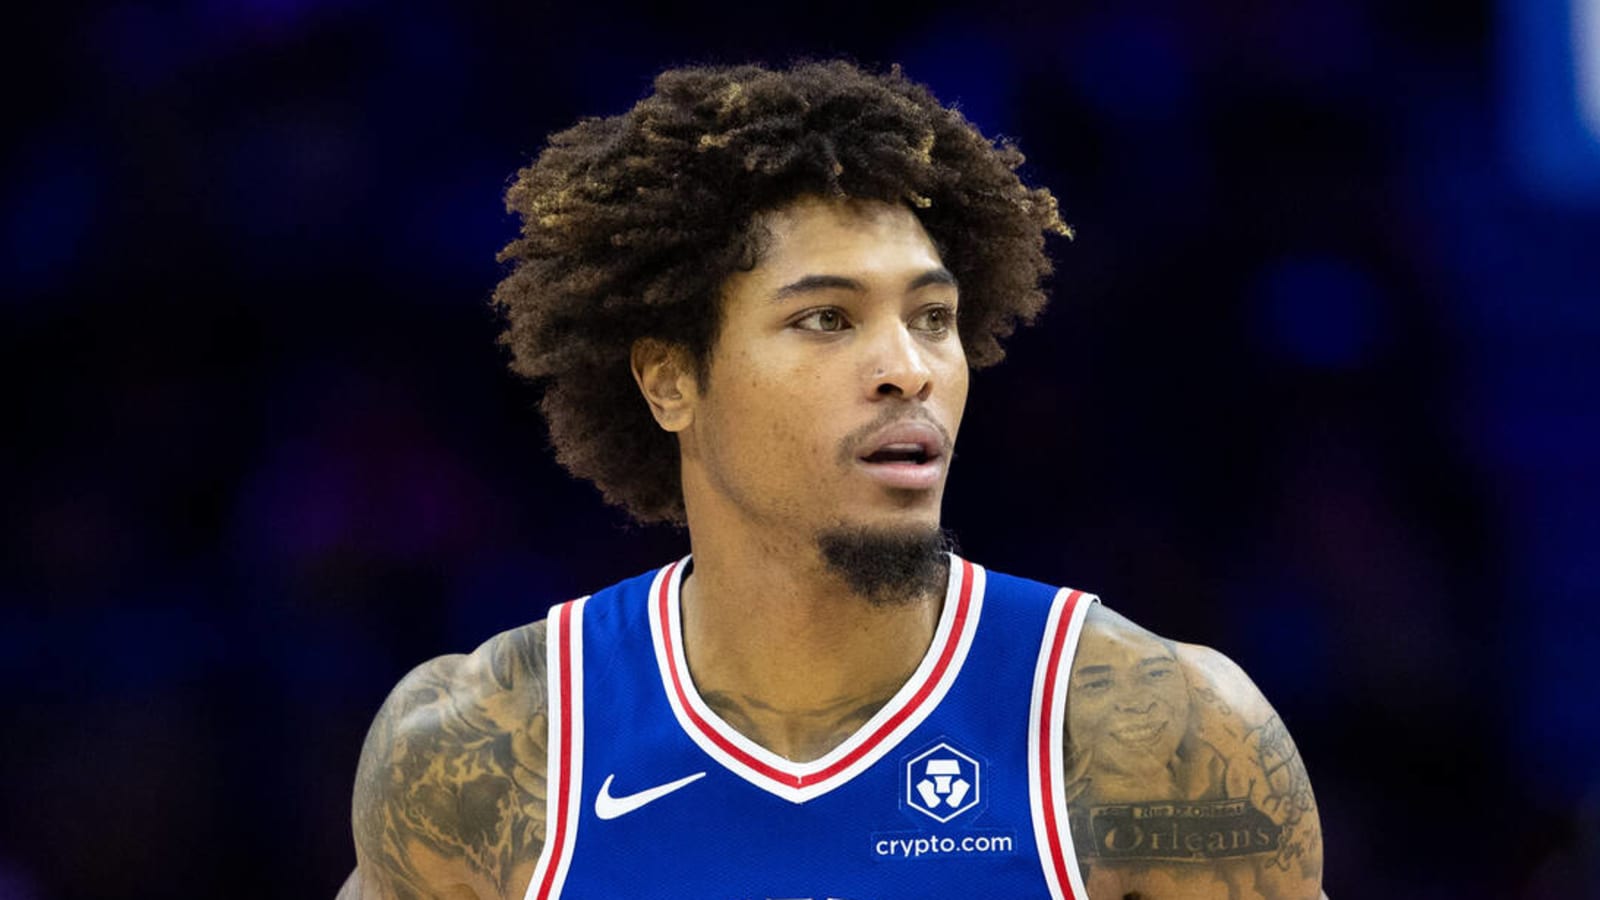 New details emerge regarding Sixers' Kelly Oubre Jr.'s condition